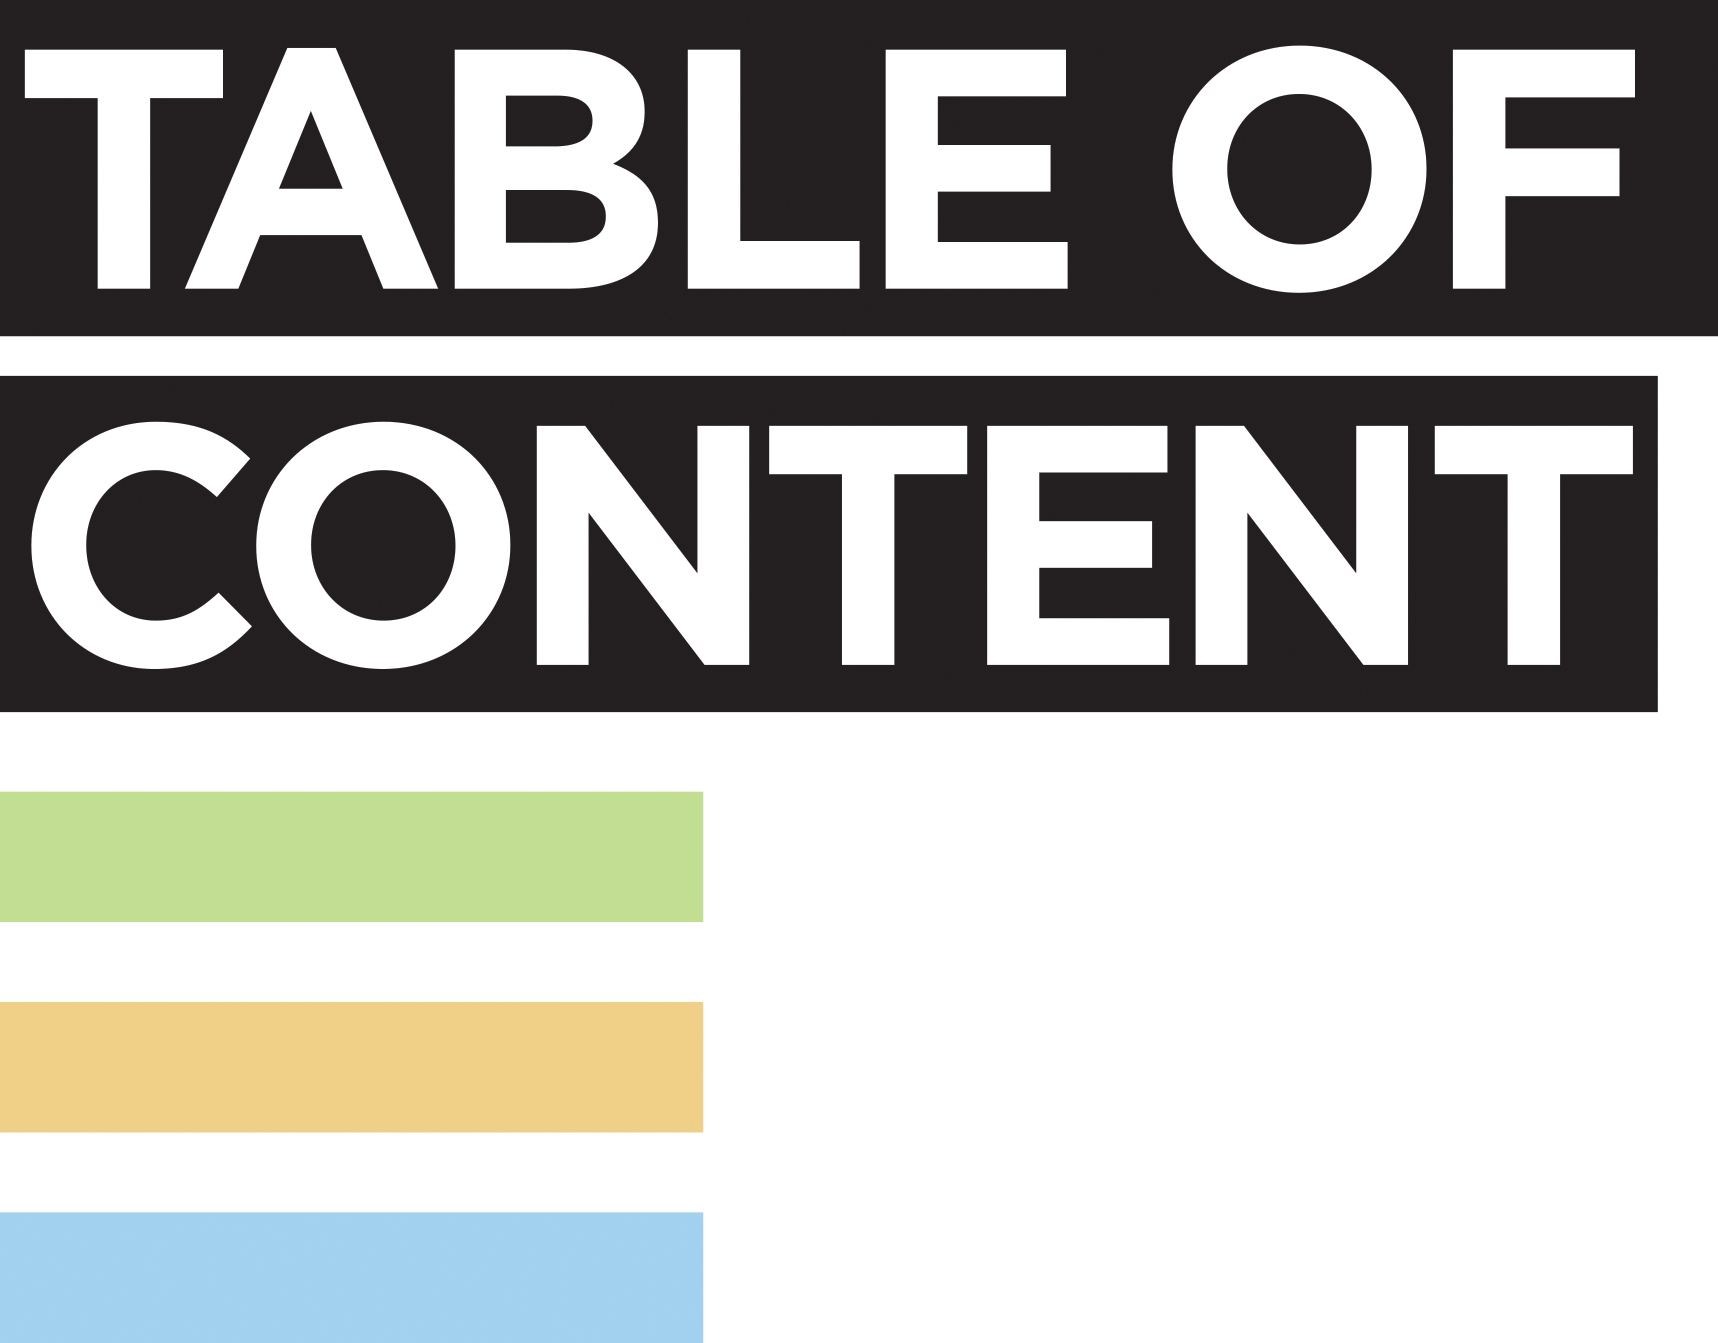 Contact - Table of Content